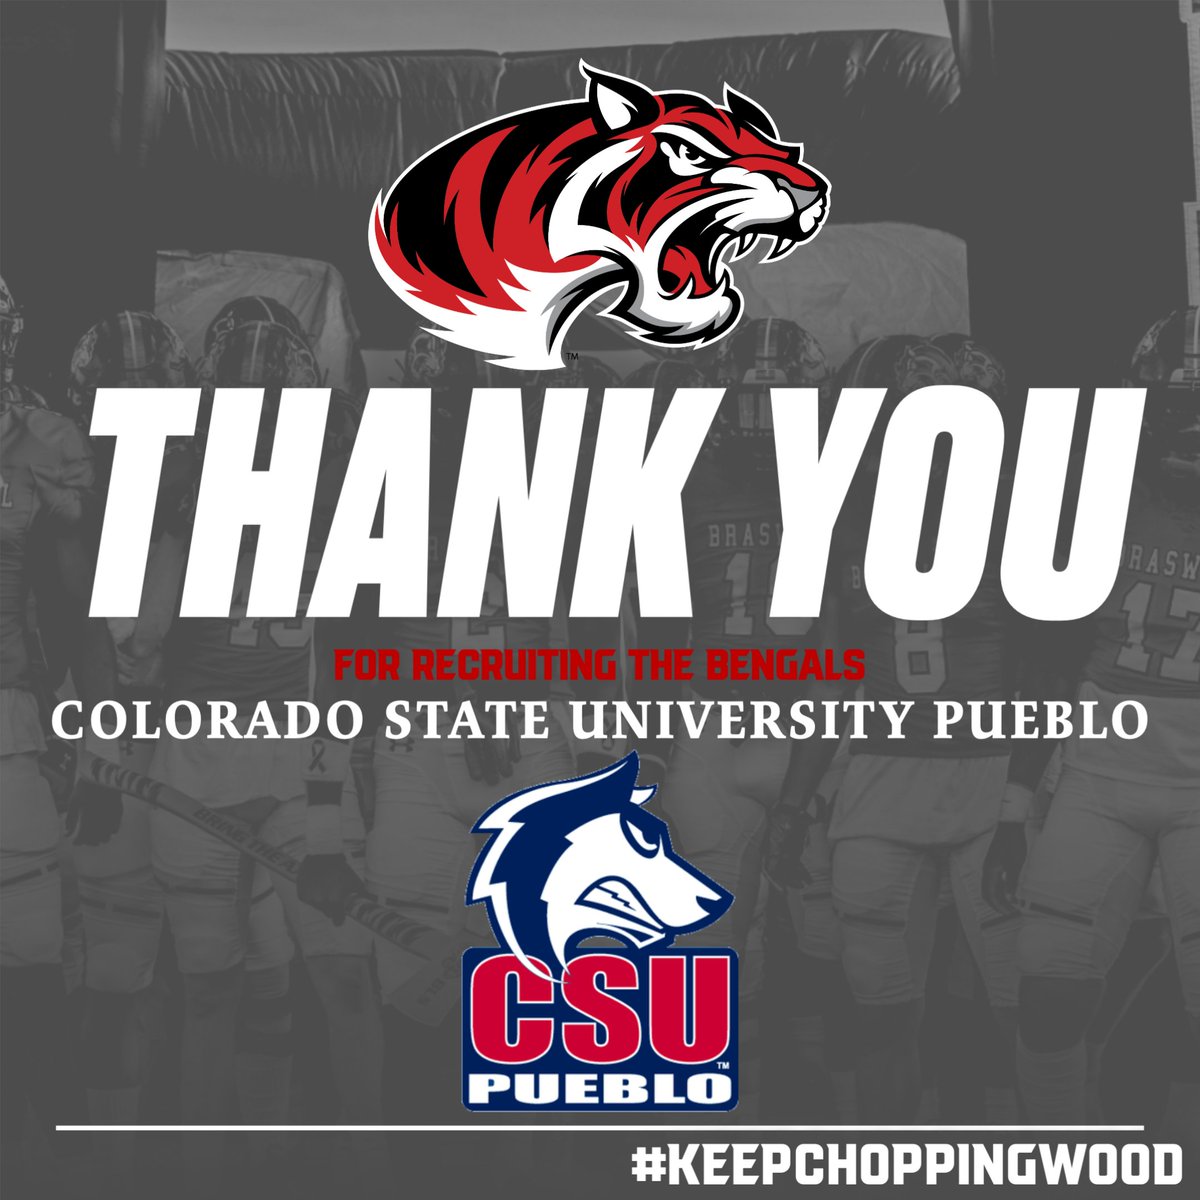 SPECIAL THANKS! to Coach Faske @CoachFaske and @CSUPFootball for coming by and recruiting the Bengals! #KeepChoppingWood 🪓 #RecruitTheBengals